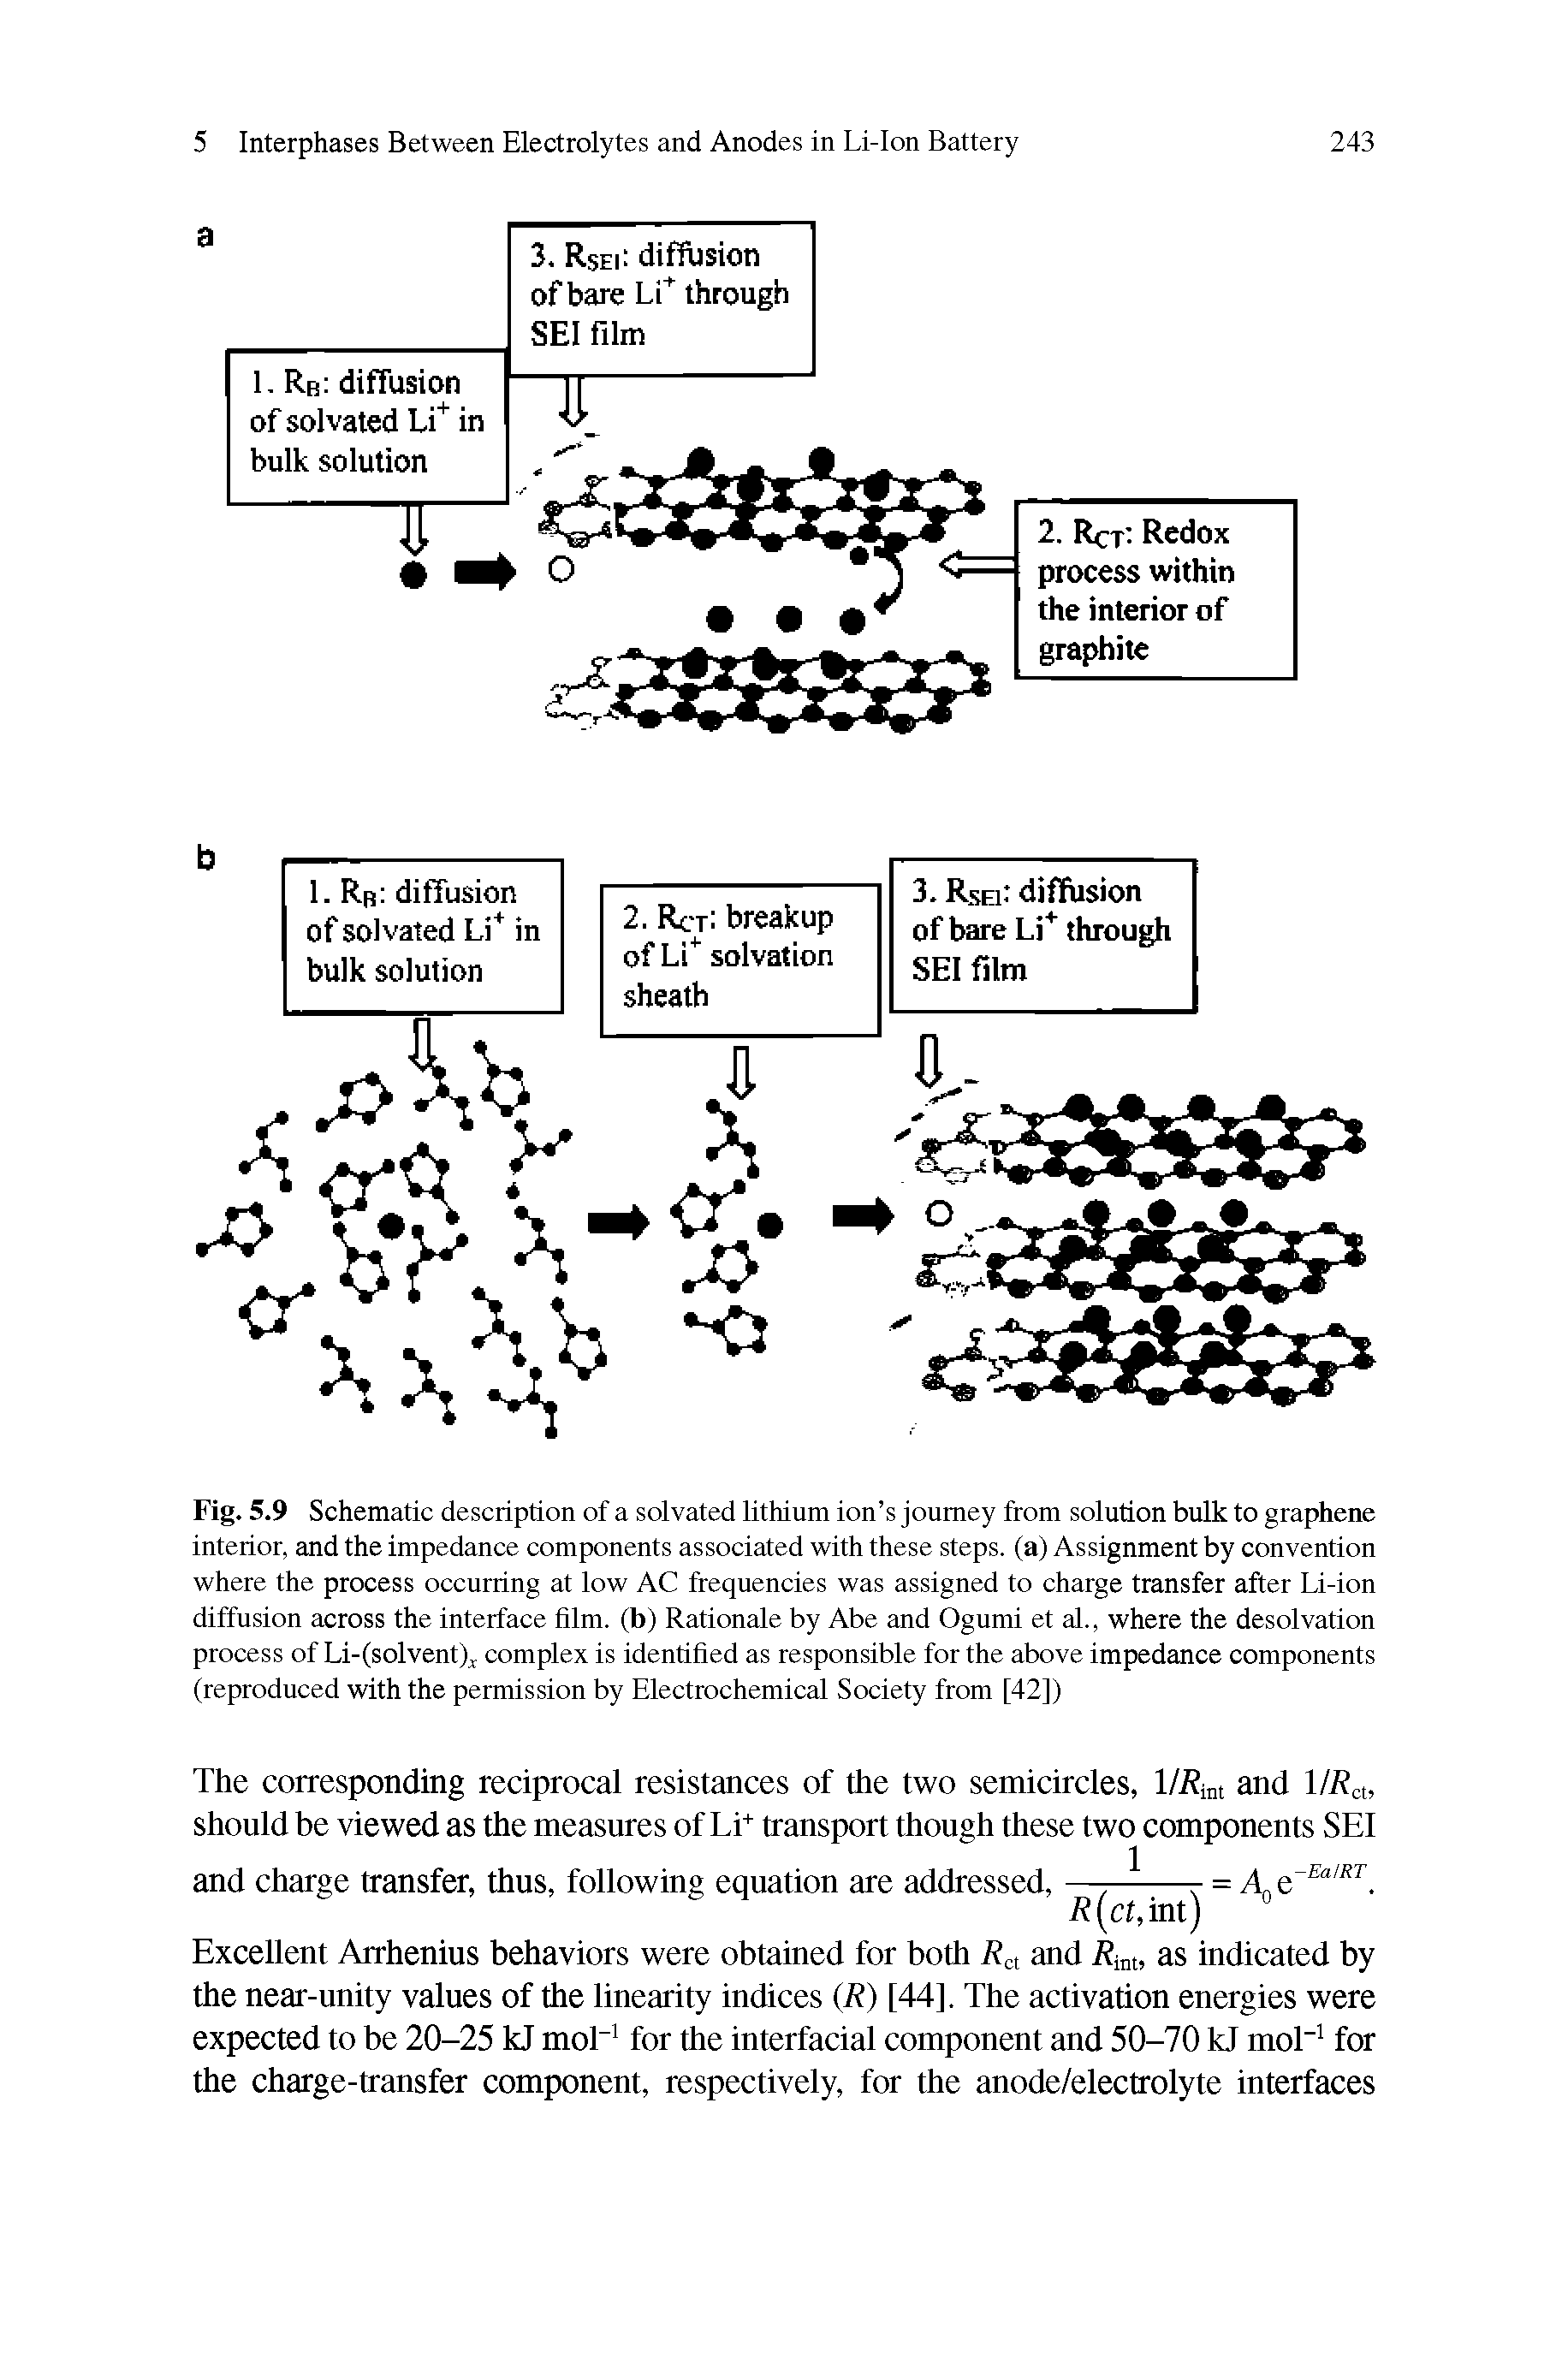 Fig. 5.9 Schematic description of a solvated lithium ion s journey from solution bulk to graphene interior, and the impedance components associated with these steps, (a) Assignment by convention where the process occurring at low AC frequencies was assigned to charge transfer after Li-ion diffusion across the interface film, (b) Rationale by Abe and Ogumi et al., where the desolvation process of Li-(solvent)j complex is identified as responsible for the above impedance components (reproduced with the permission by Electrochemical Society from [42])...